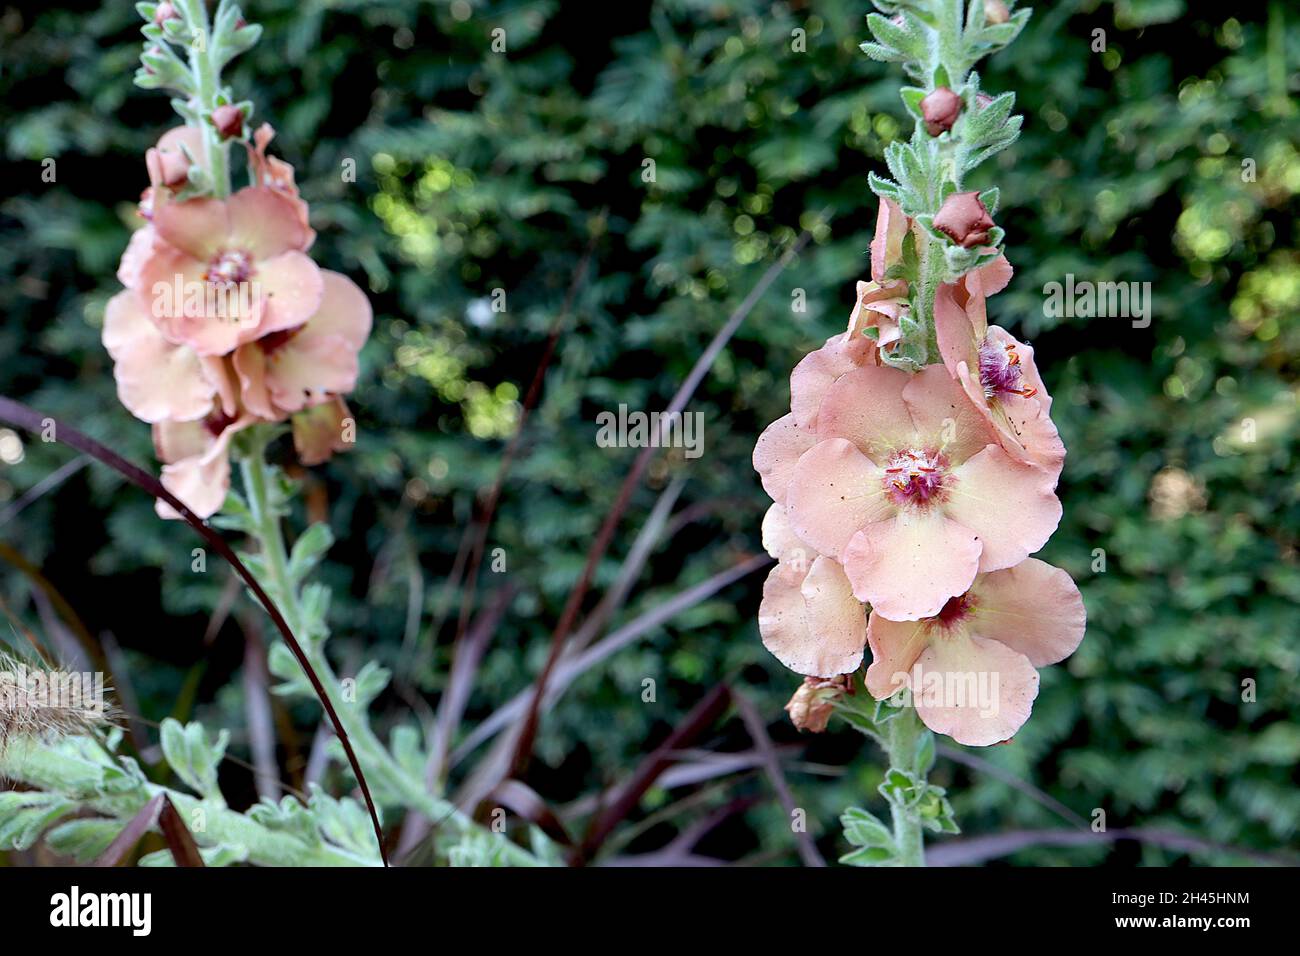 Verbascum ‘Jackie’ mullein Jackie – loose flower spikes of apricot peach bowl-shaped flowers with fluffy purple stamens, October, England, UK Stock Photo